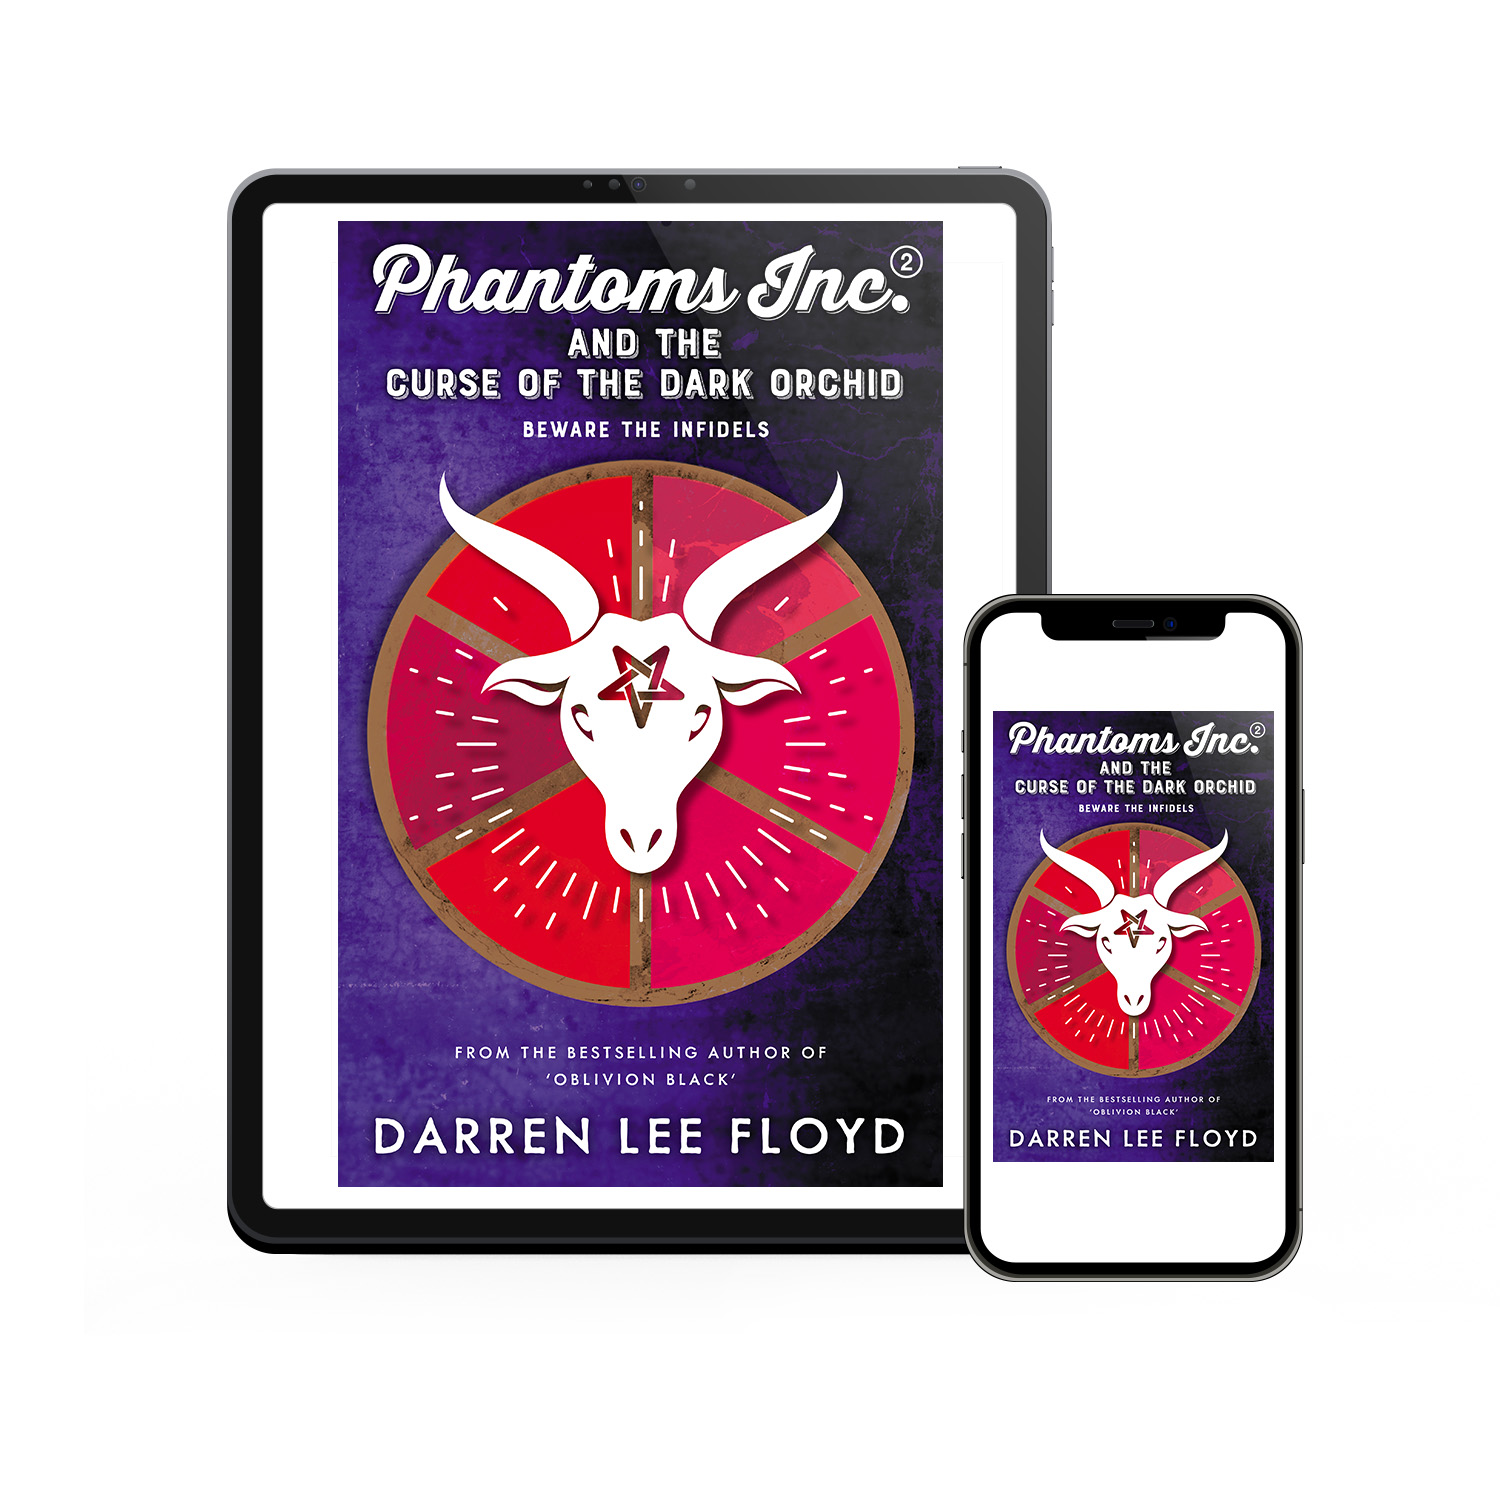 The 'Phantoms Inc.' series is a fun scifi / supernatural hybrid. The author is Darren Lee Floyd. The cover and interior design of the books are by Mark Thomas. To learn more about what Mark could do for your book, please visit coverness.com.